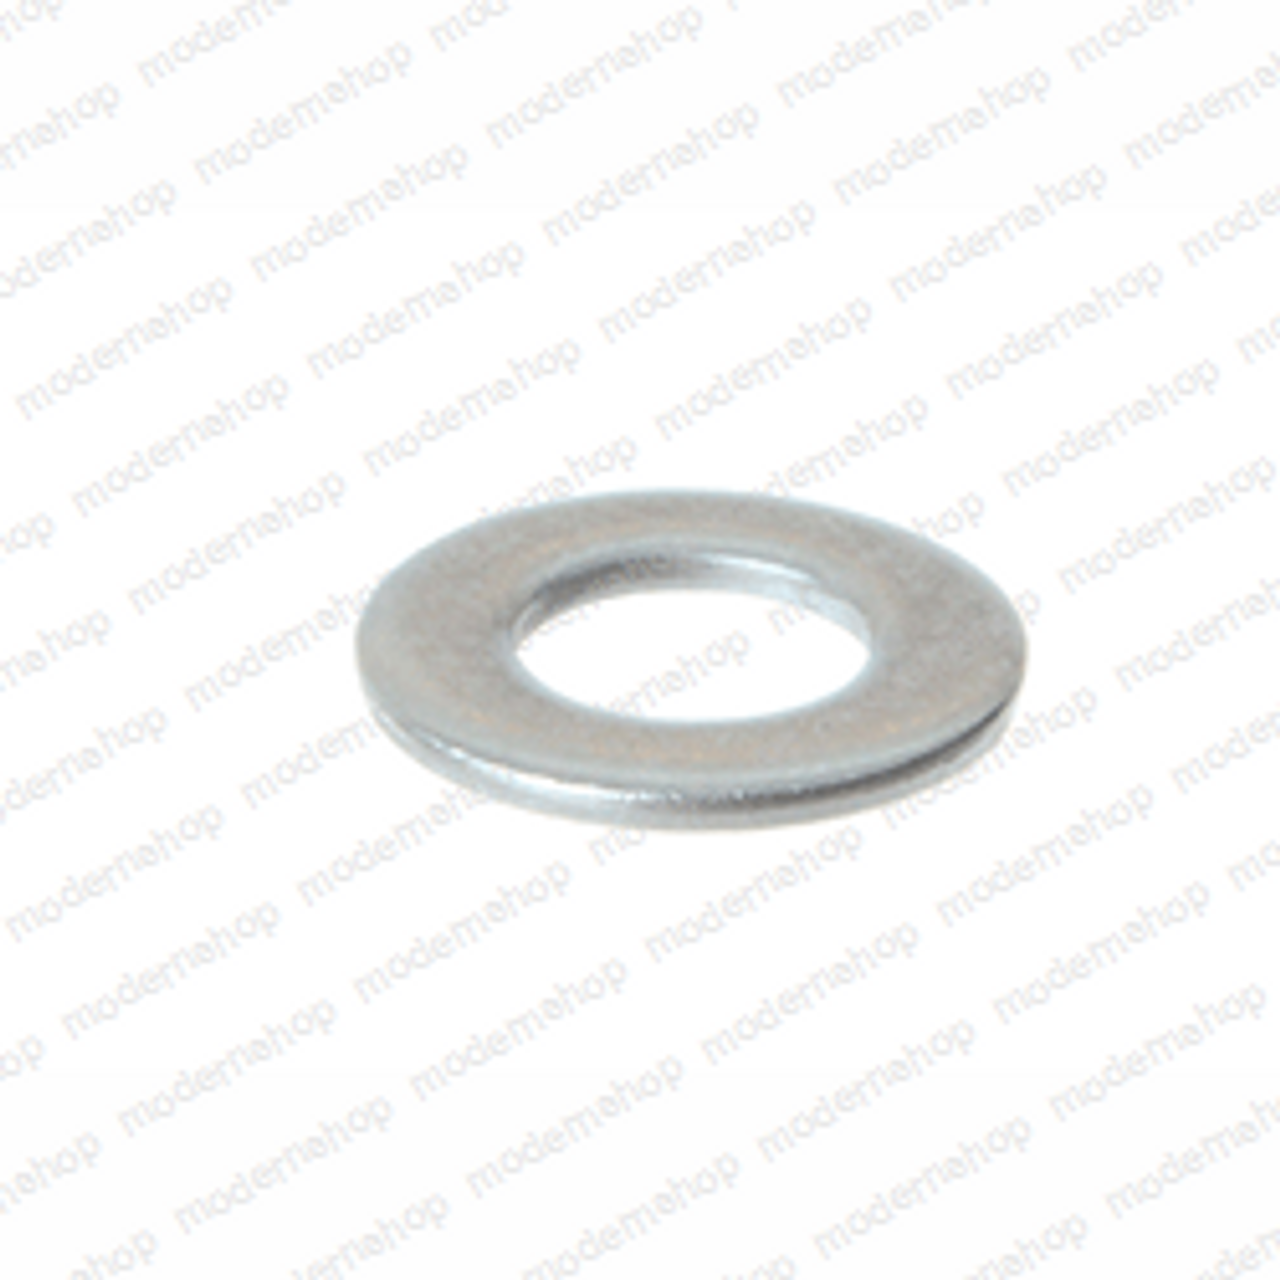 56002938: Clarke Sweepers WASHER